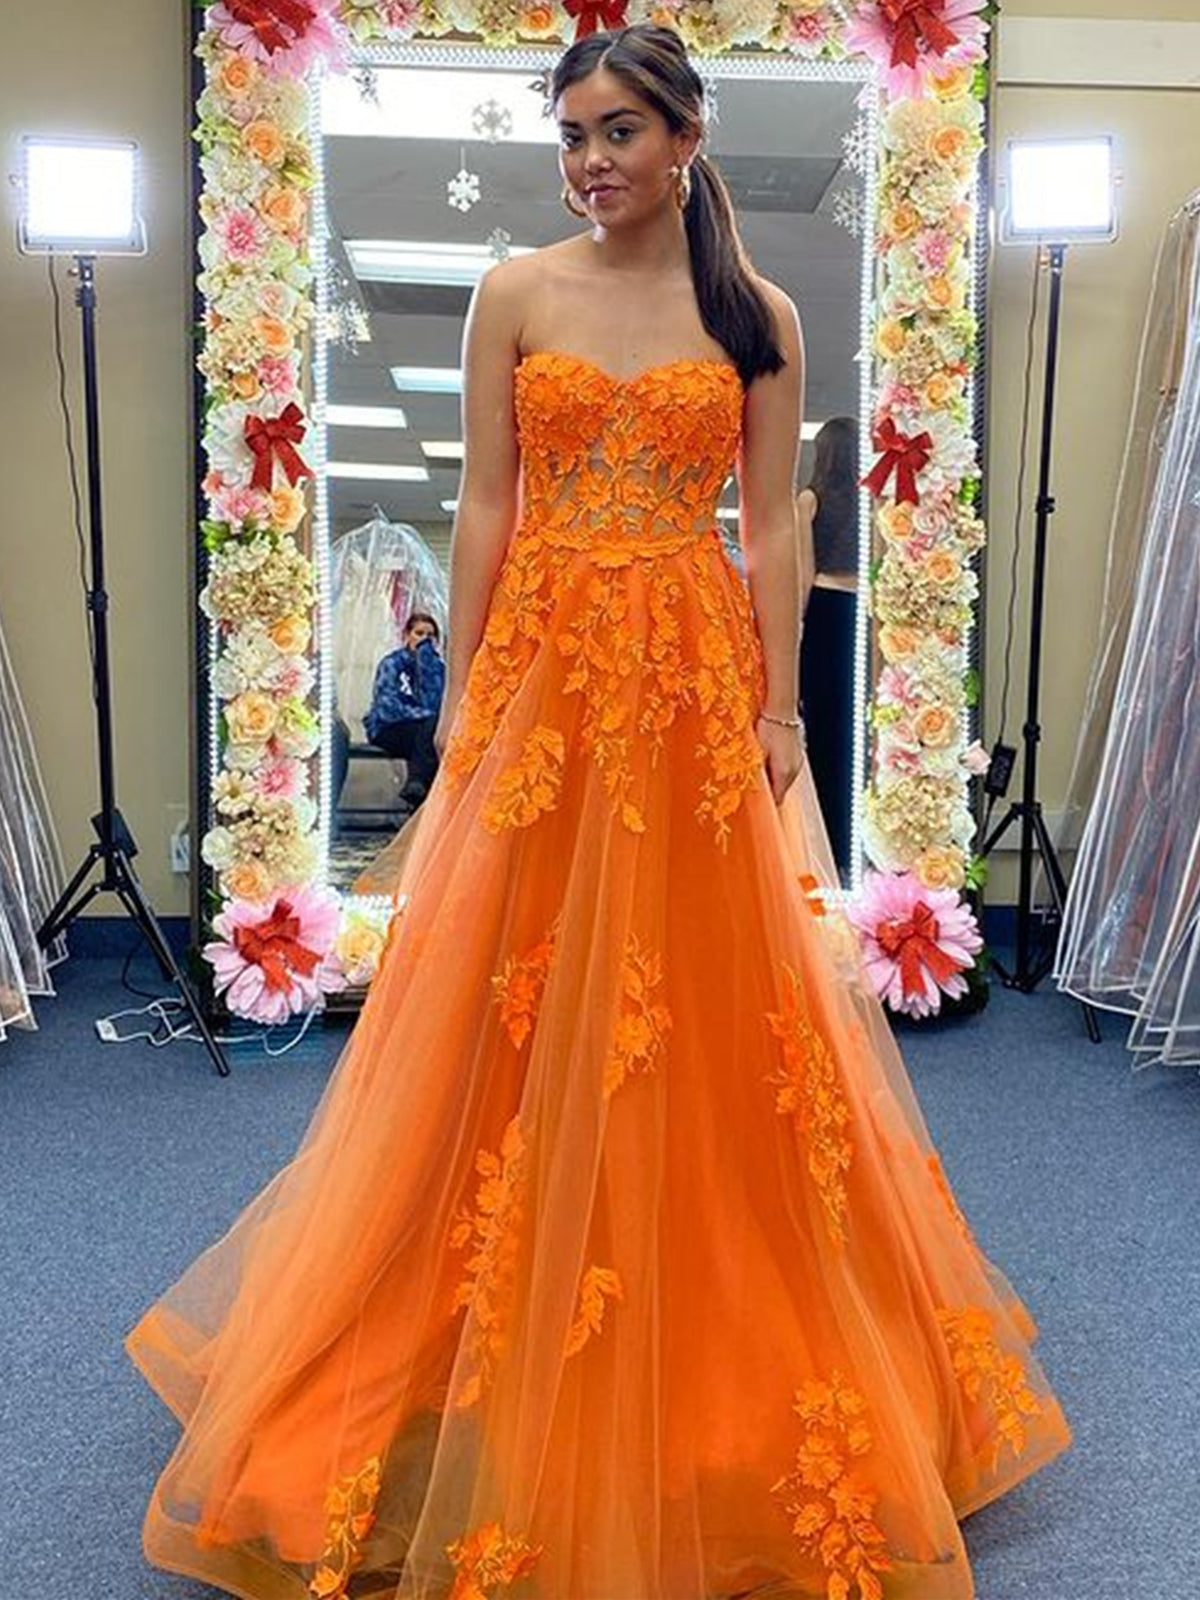 Long A-line Strapless Tulle Lace Prom Dress Orange Formal Evening Gowns-BIZTUNNEL